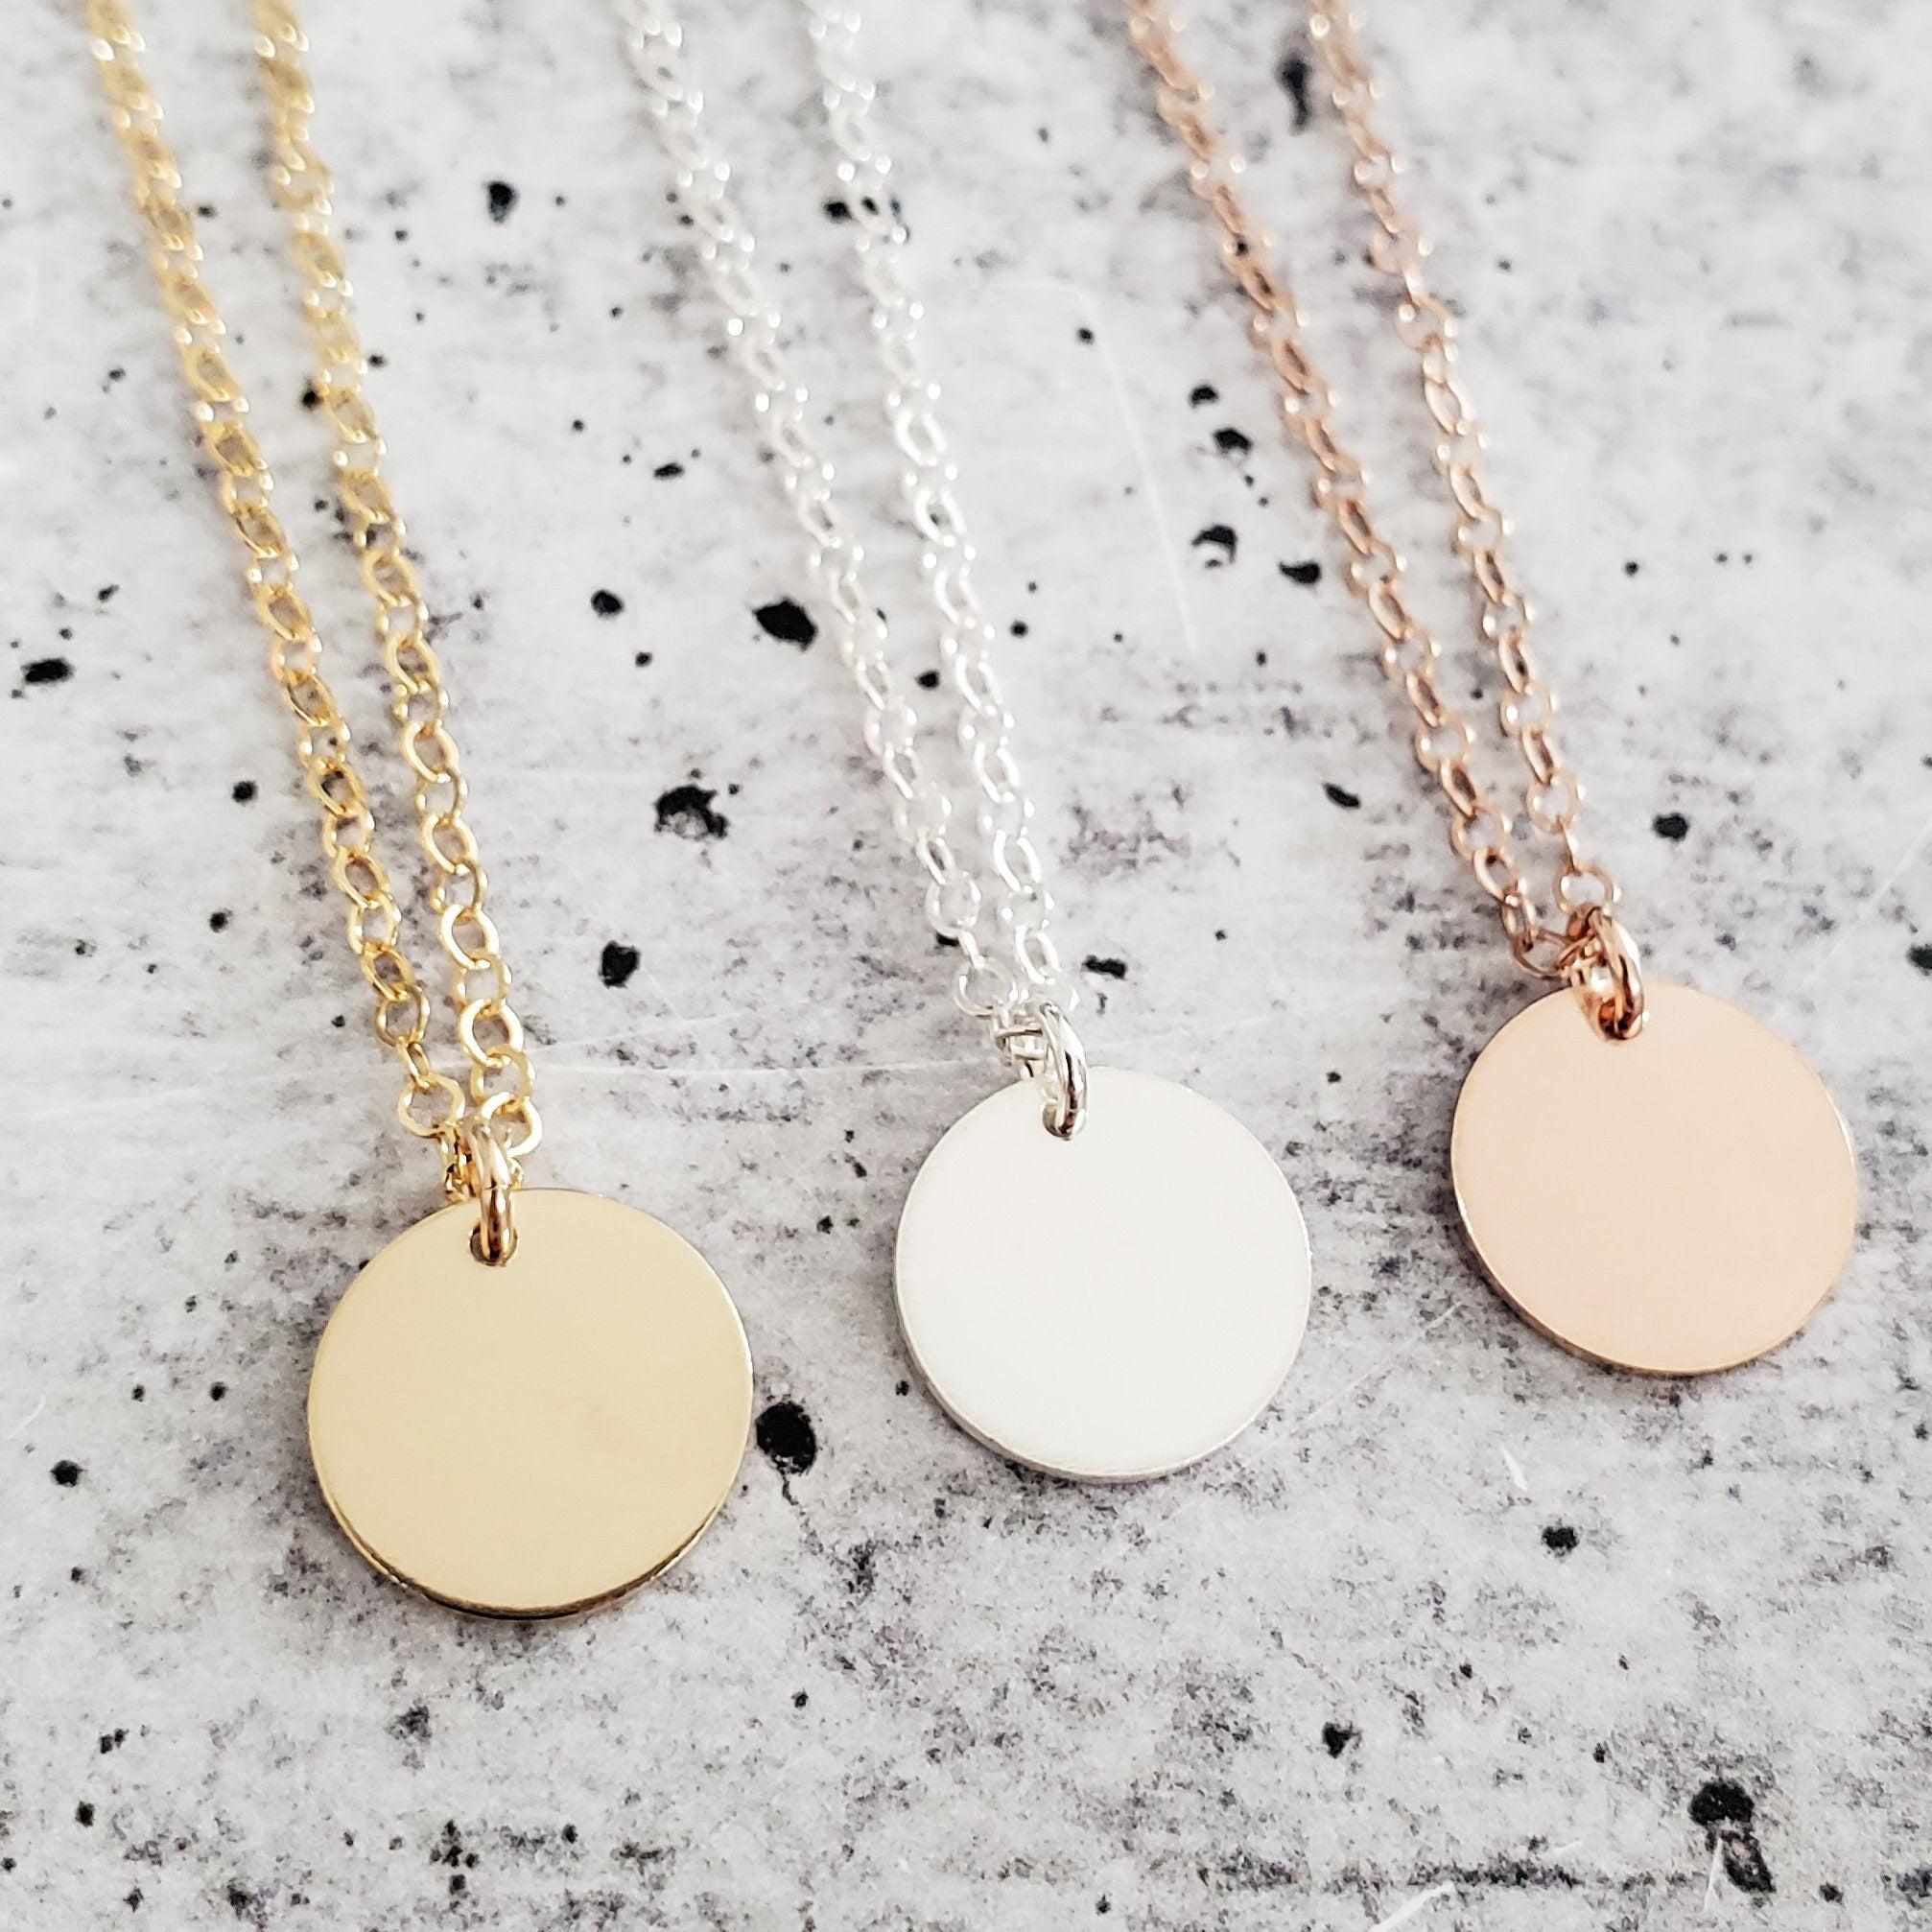 Gold Ocean Sunset Necklace - Minimalist Silver Boho Beach Charm Necklace - Initial Necklace for Beach Baby - Rose Gold Teen Dainty Necklace